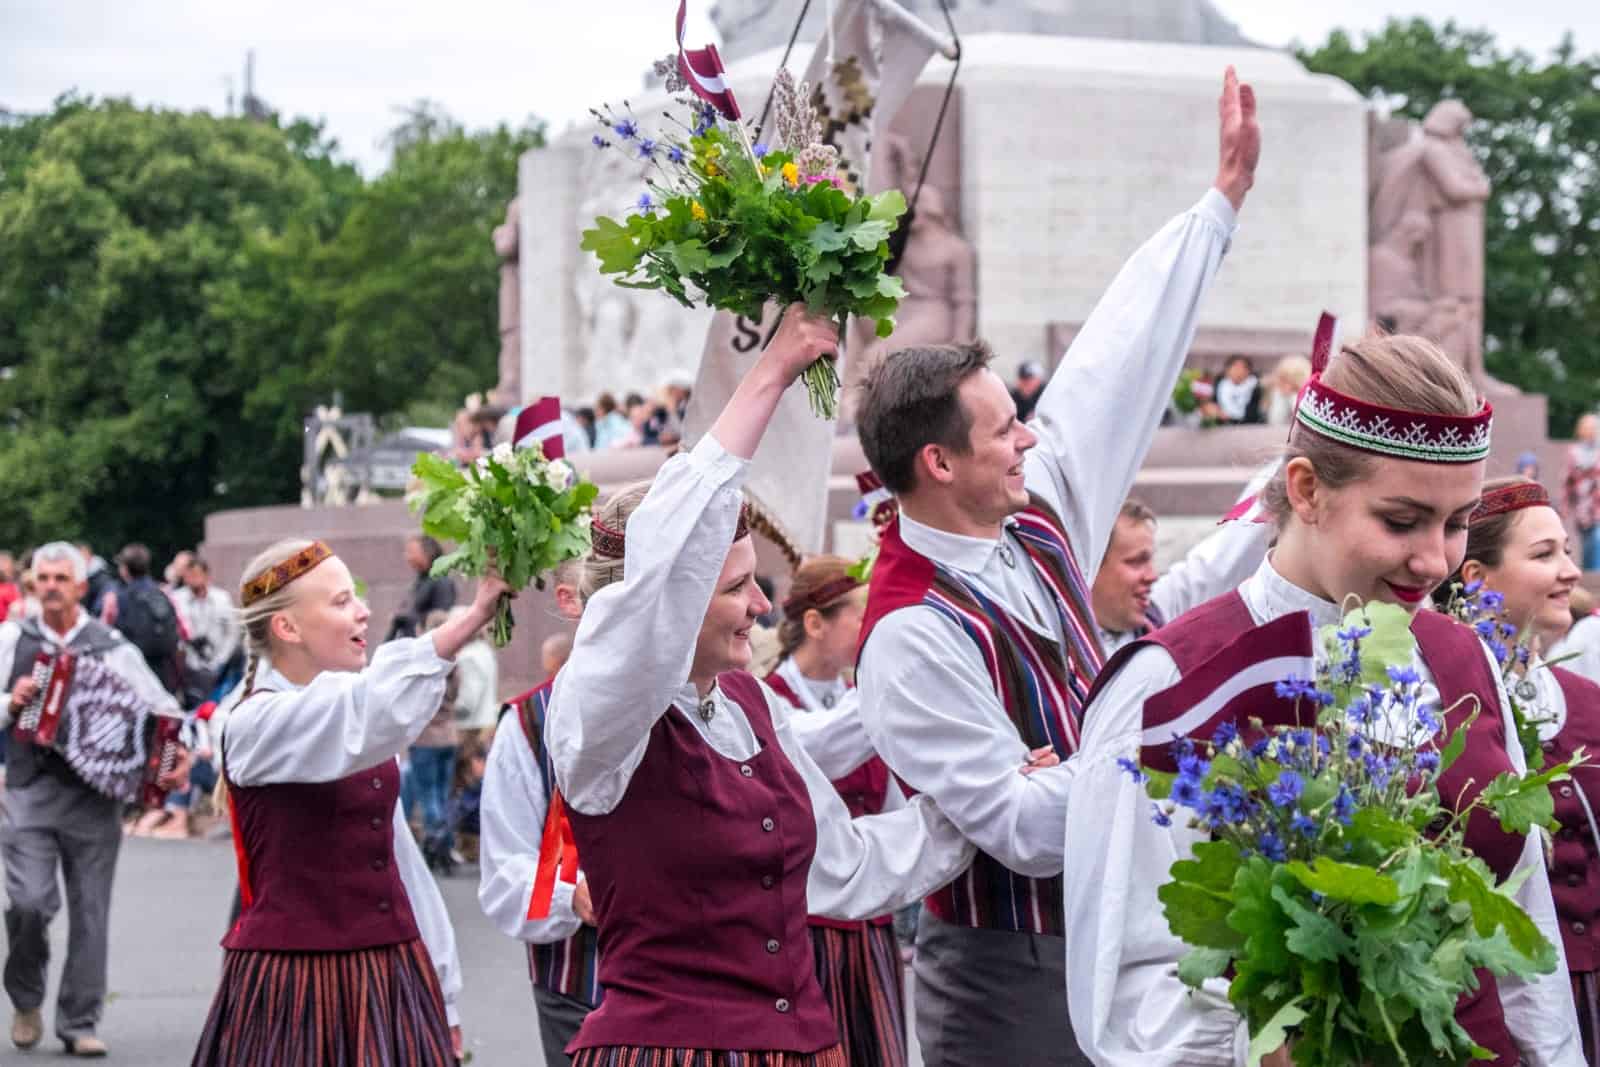 People cheer at the Latvia Song Dance Celebration in Riga